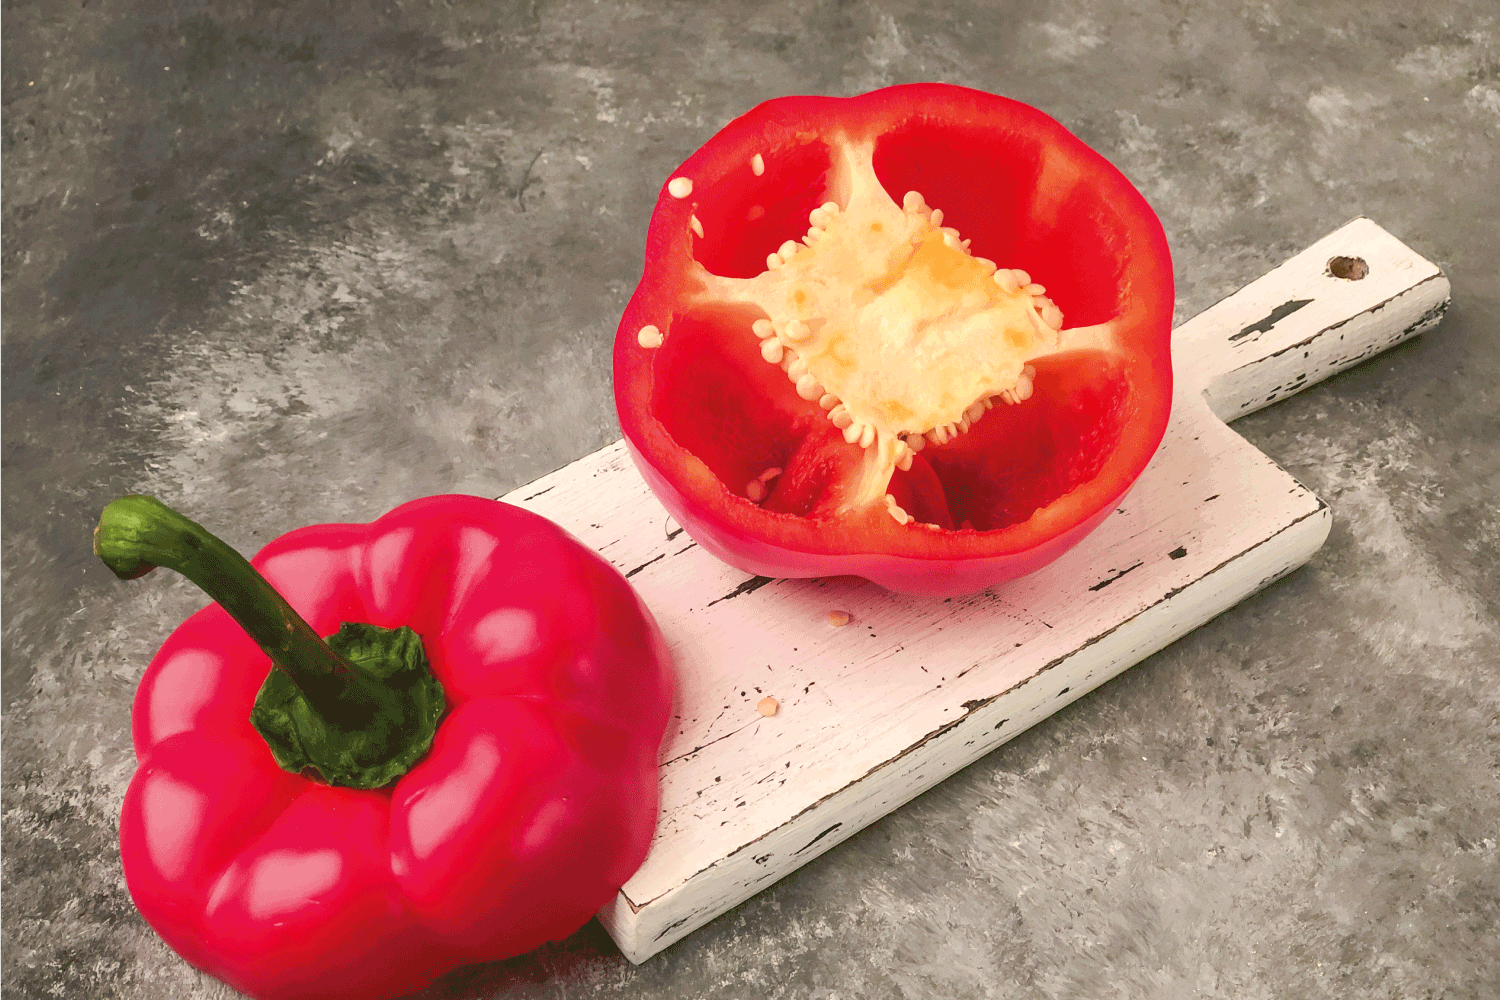 halved red bell pepper on a wooden cutting board on gray background